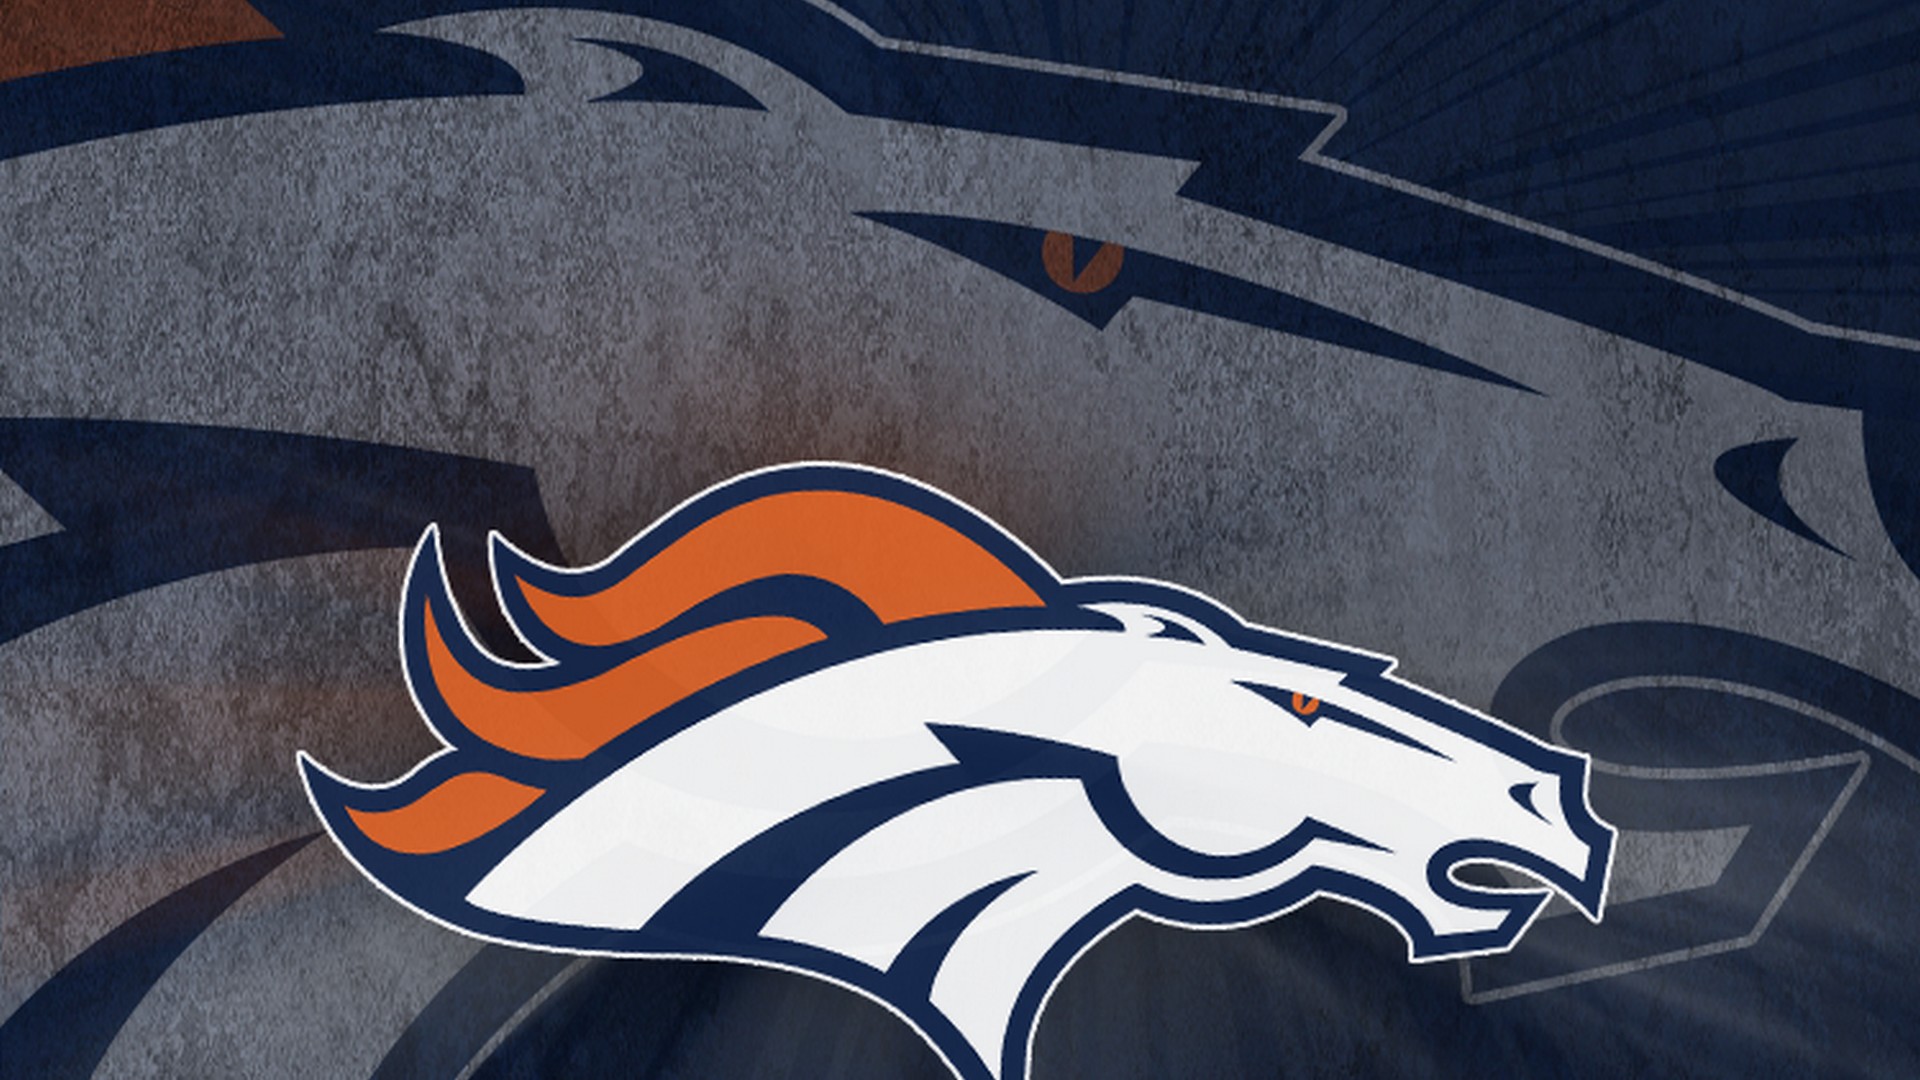 Wallpapers Denver Broncos With Resolution 1920X1080